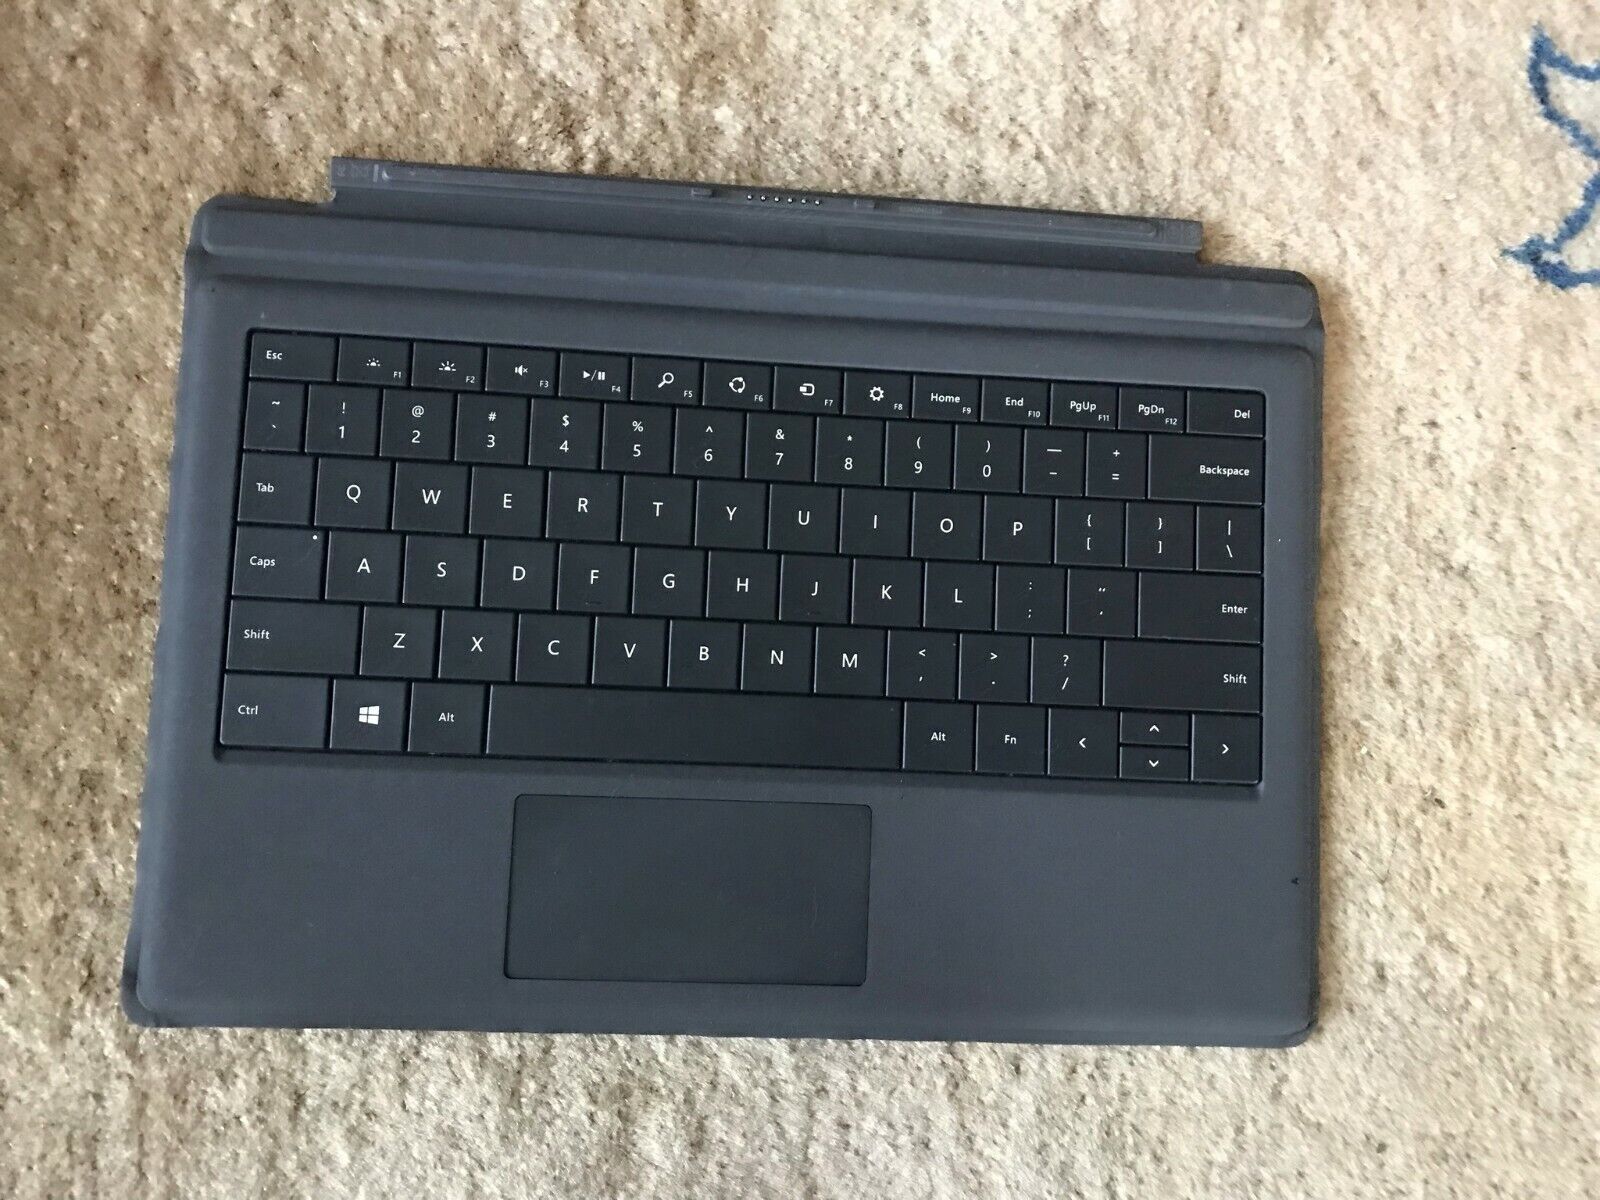 Microsoft Type Cover Keyboard for Surface Pro - Iron Grey